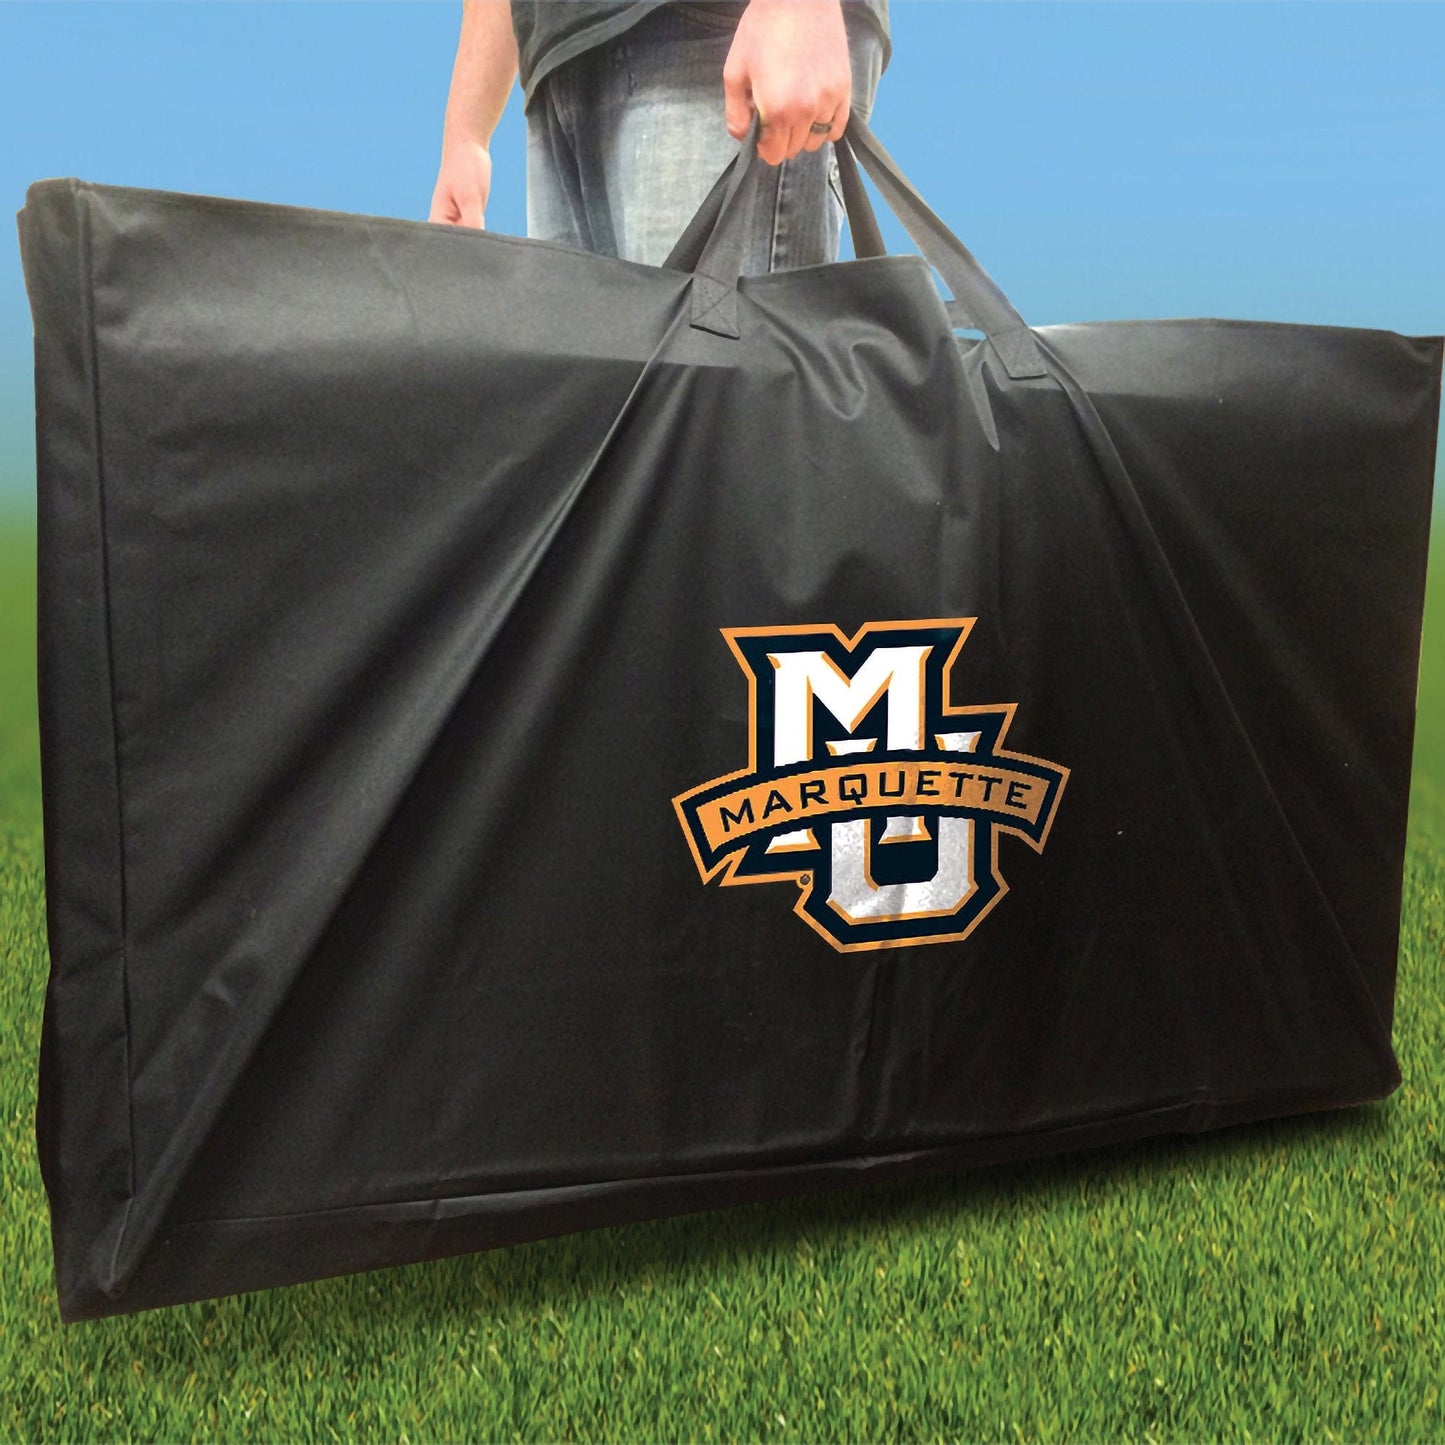 Marquette Swoosh team logo carrying case